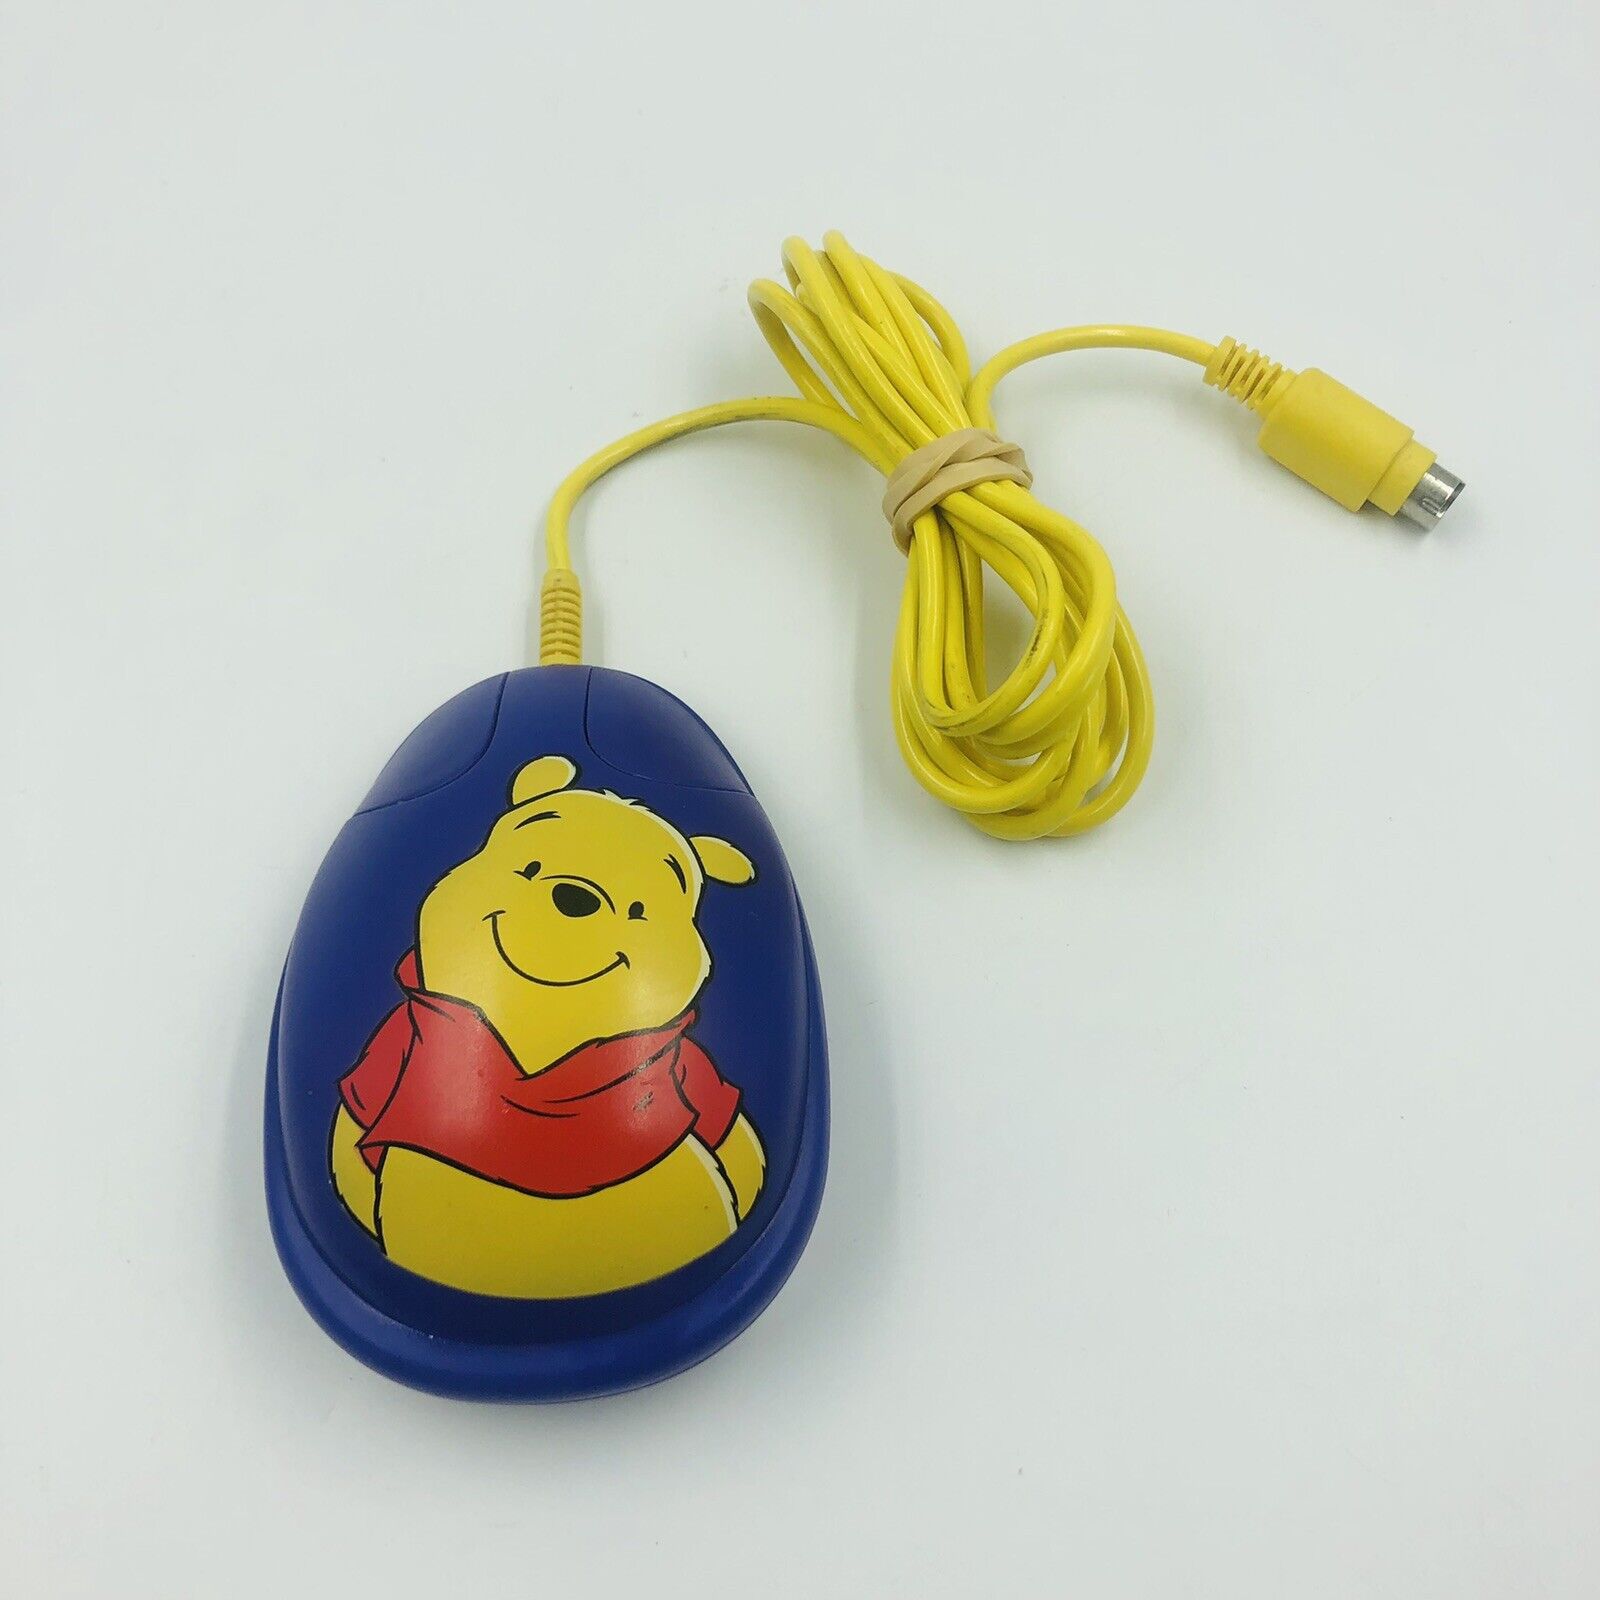 Rare Disney Winnie The Pooh  Mouse PS/2 Computer Ball Mouse Vintage Disney